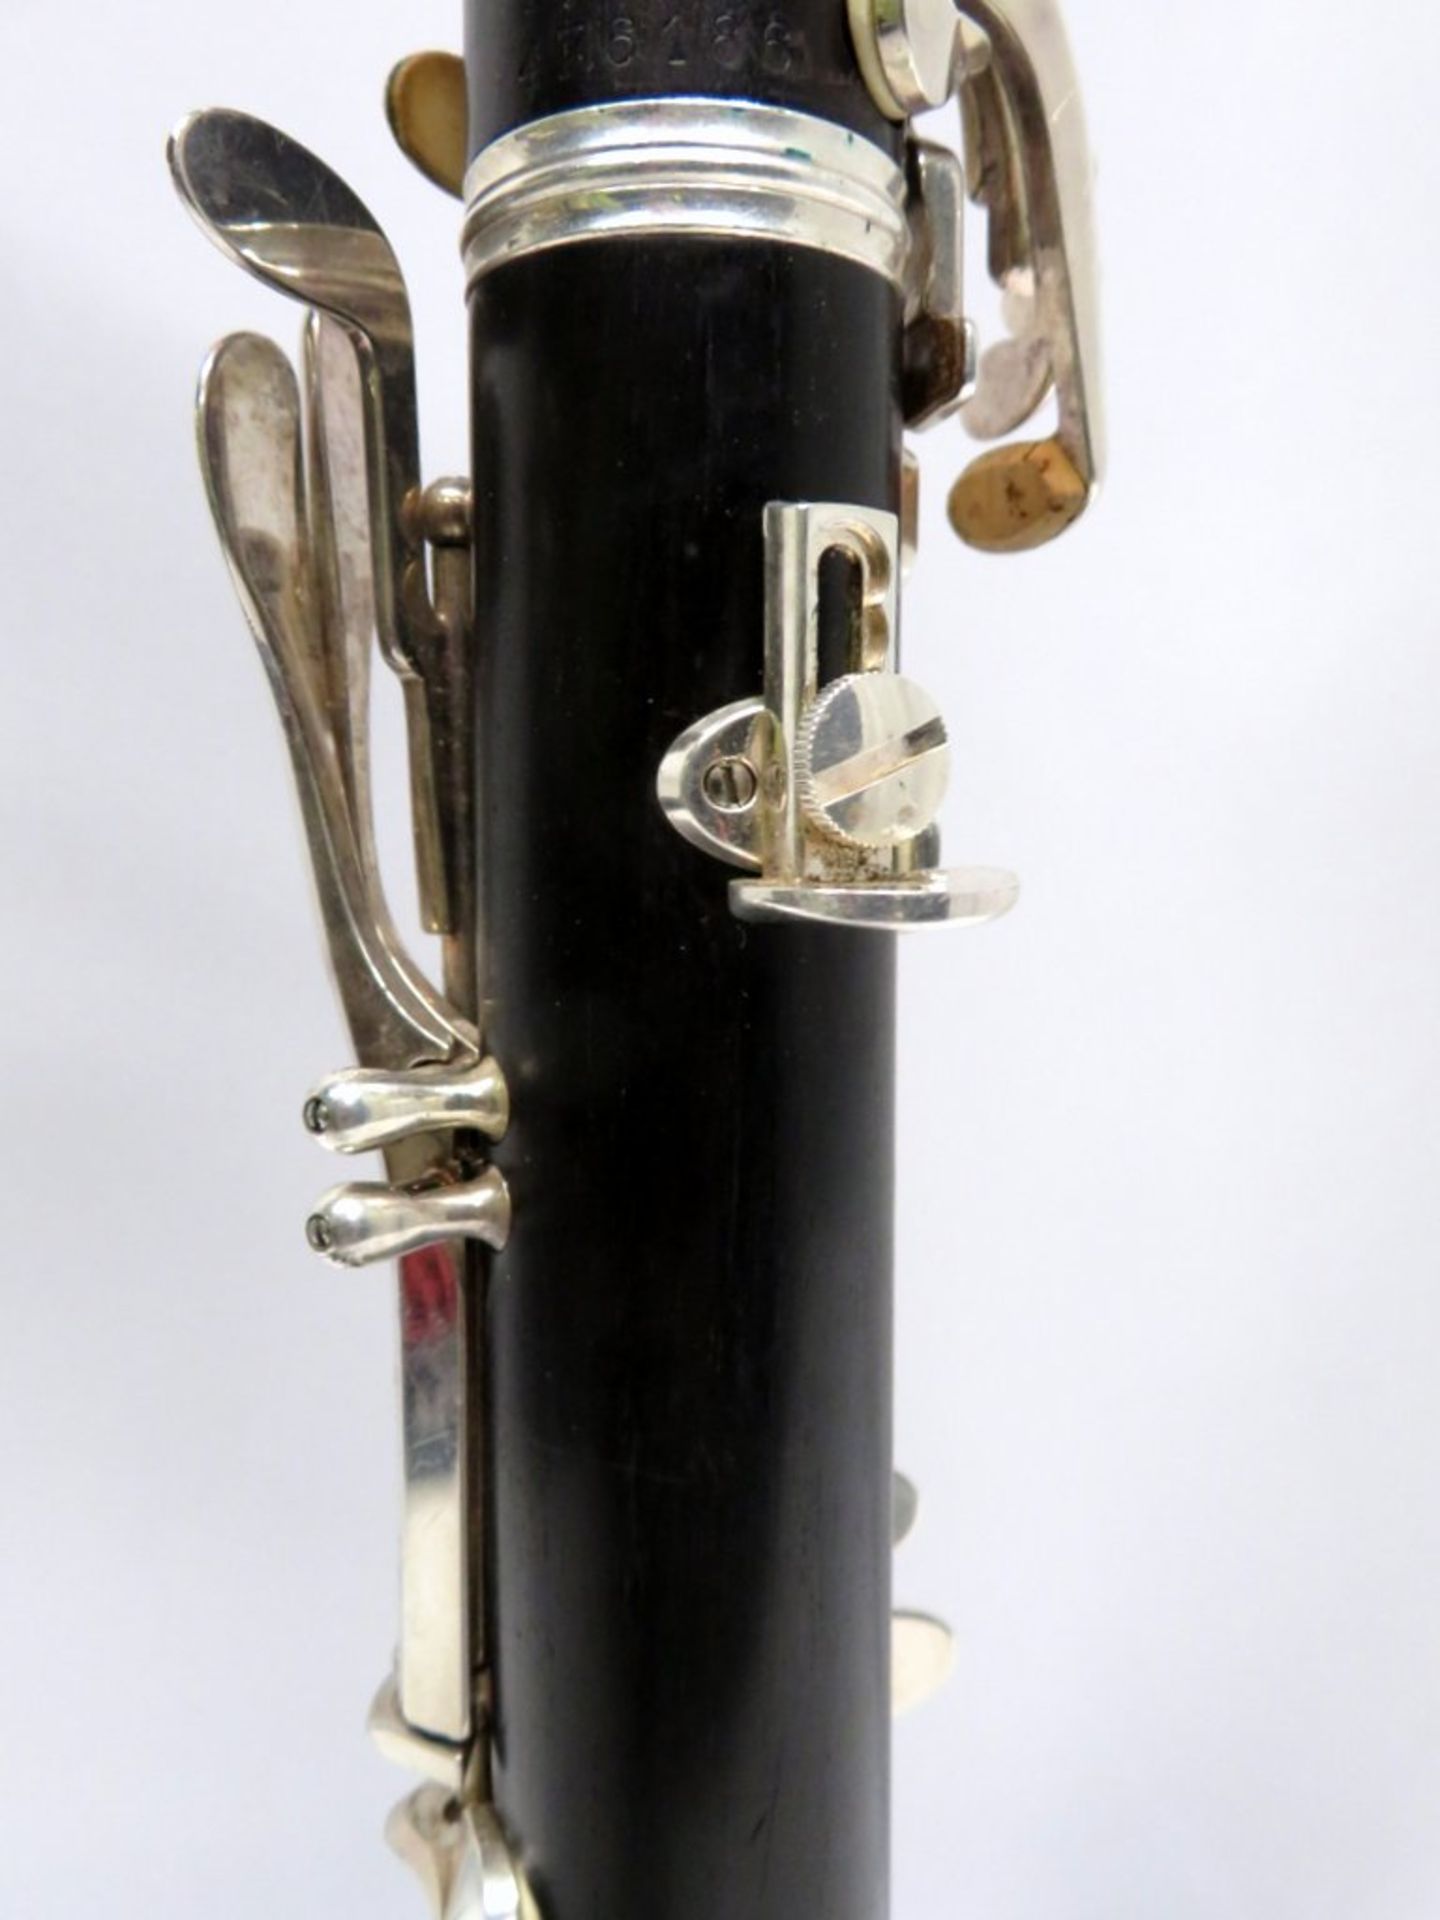 Buffet Crampon Clarinet Complete With Case. - Image 12 of 13